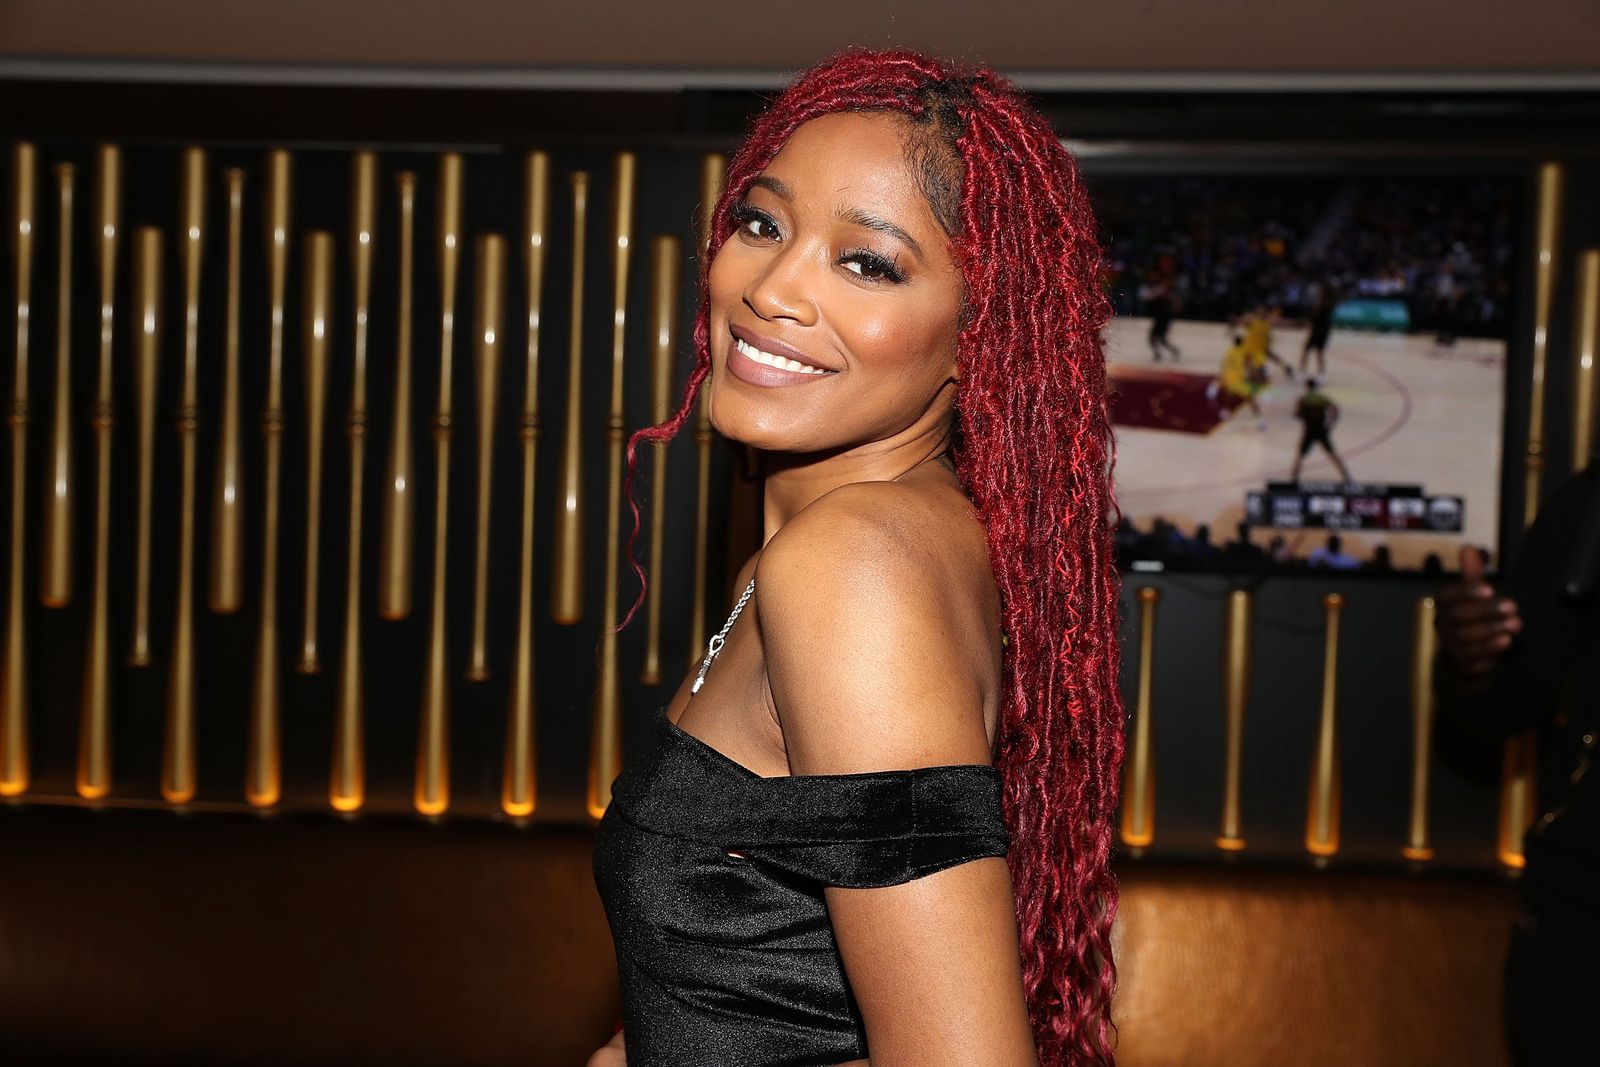 Keke Palmer attends her listening party at the 40/40 club in 2018 | Source: Getty Images/GlobalImagesUkraine